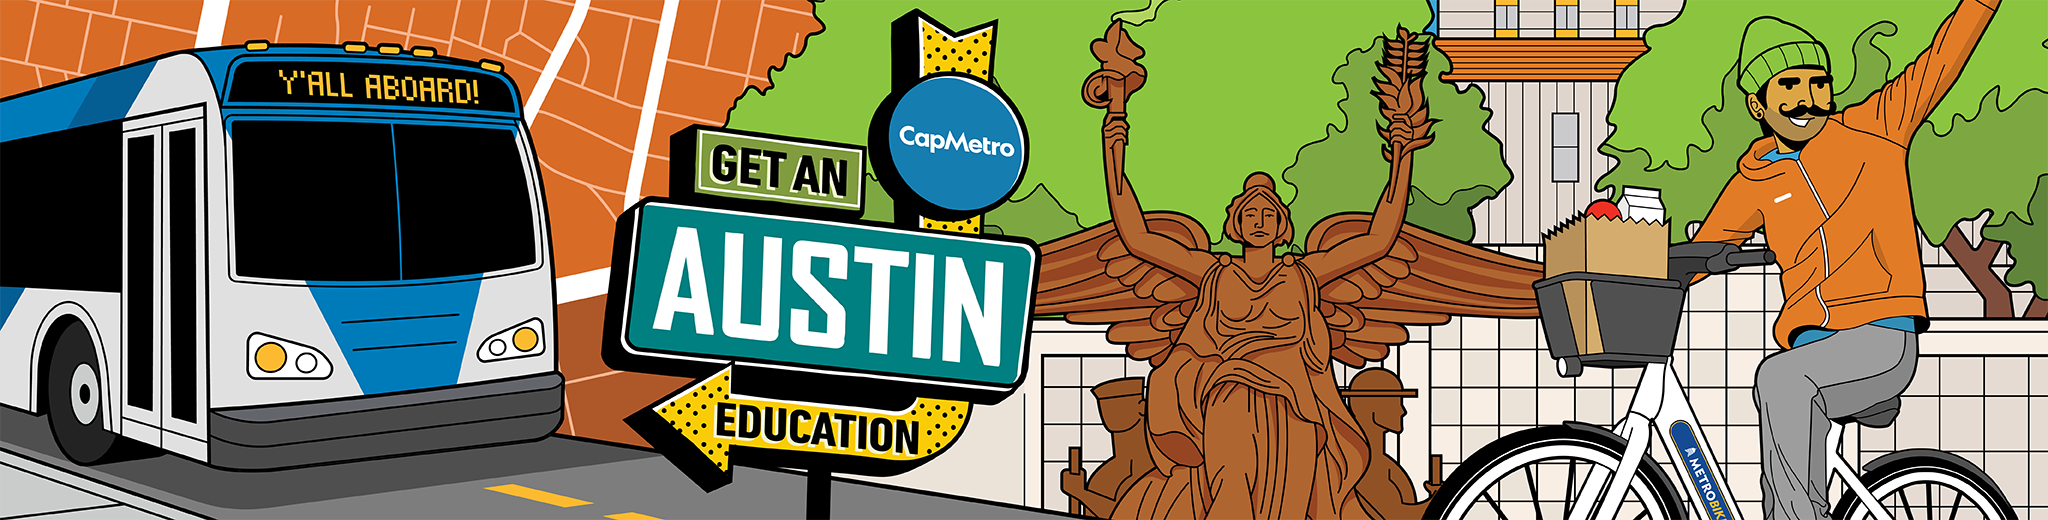 A cartoon banner rendering of iconic Austin figures and adventures along with a UT Shuttle